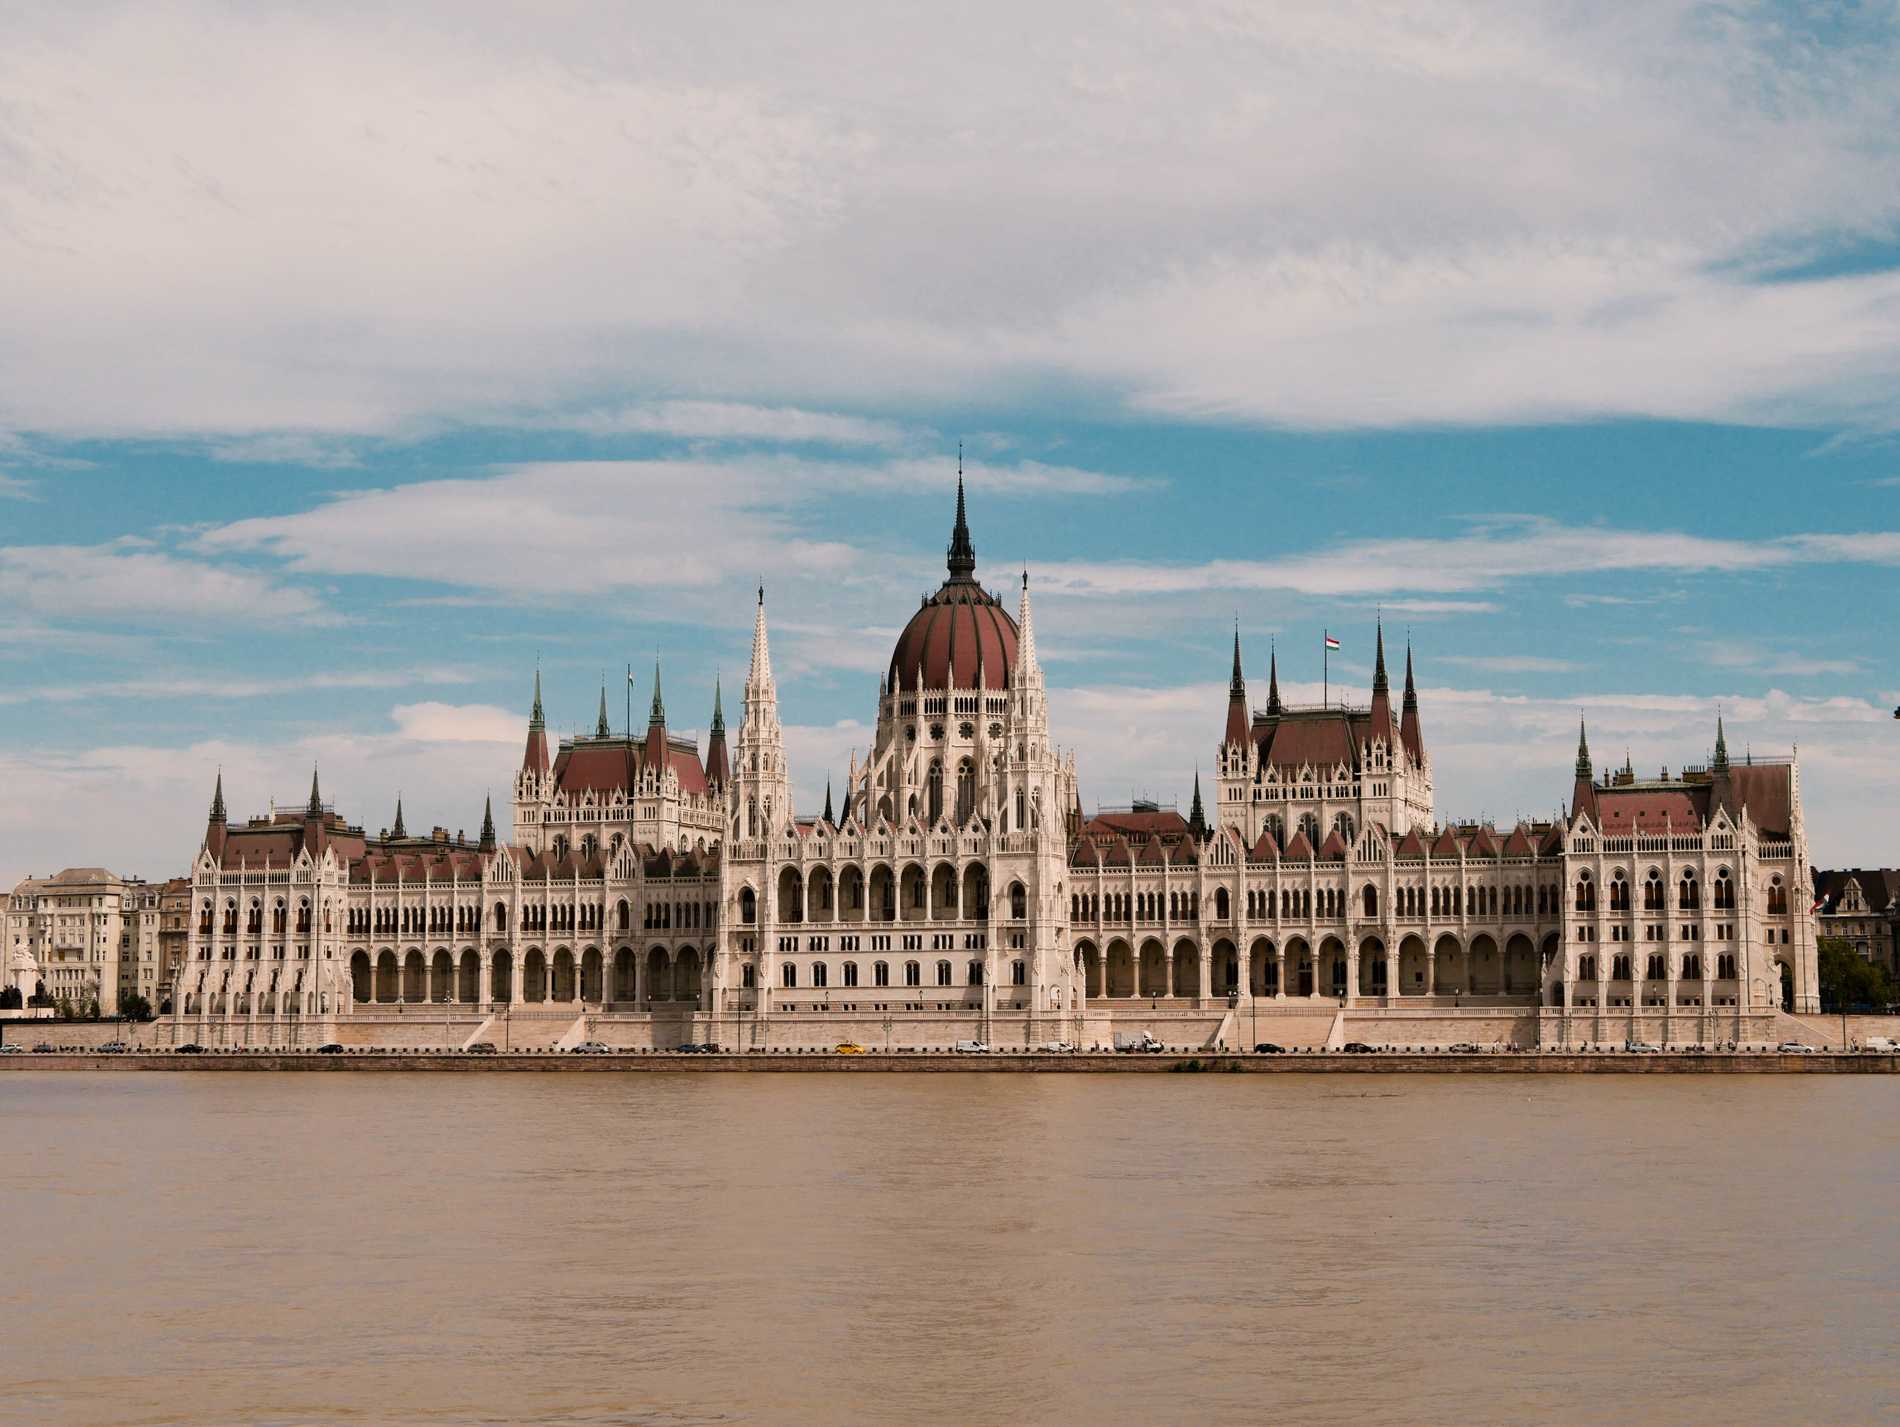 The elaborate neo-gothic Hungarian Parliament Building nestled on the eastern bank of the Danube River.